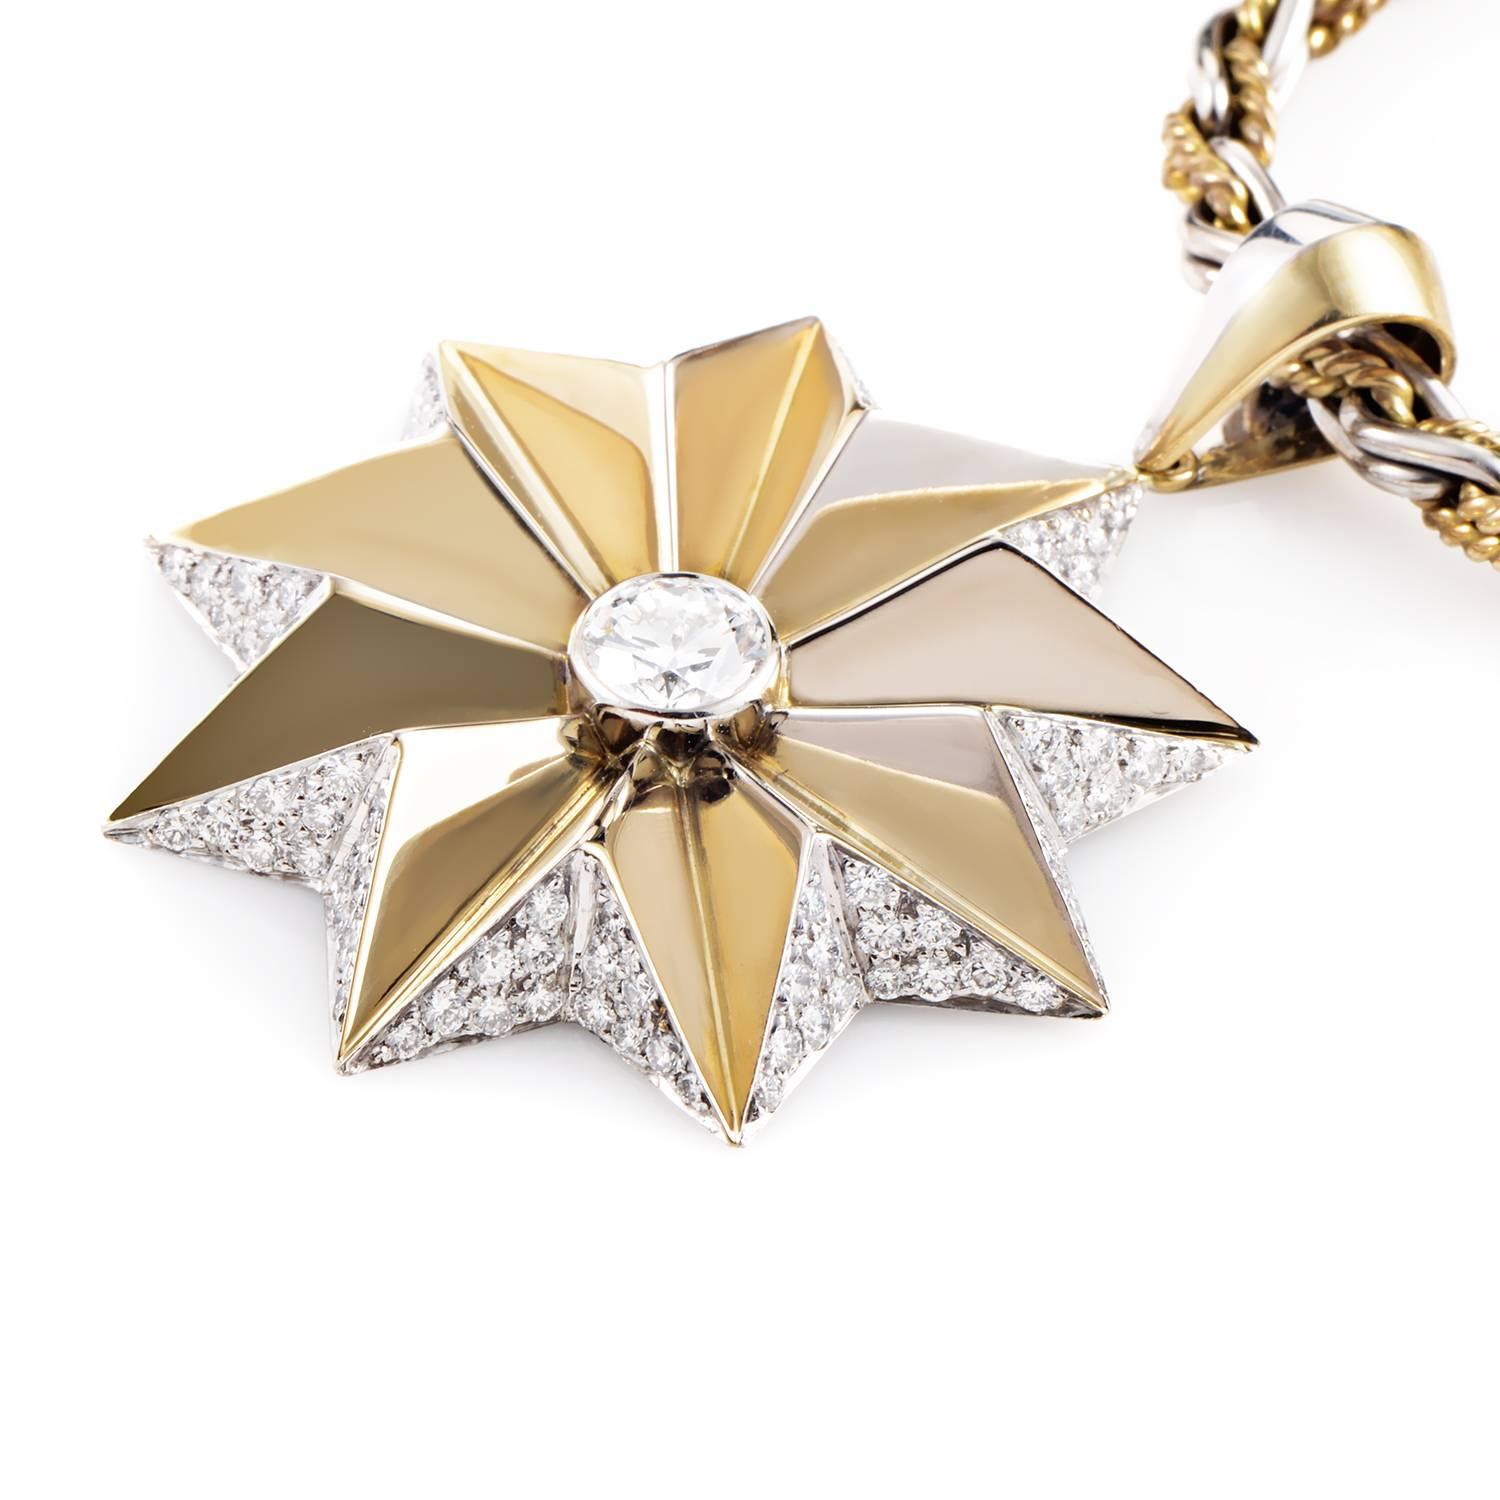 Shine bright with this festive design from Garrard! The necklace is made of a combination of 18K yellow and white gold and features a pendant made of the same materials. The pendant is accented with shimmering diamonds, including a 1.50ct diamond